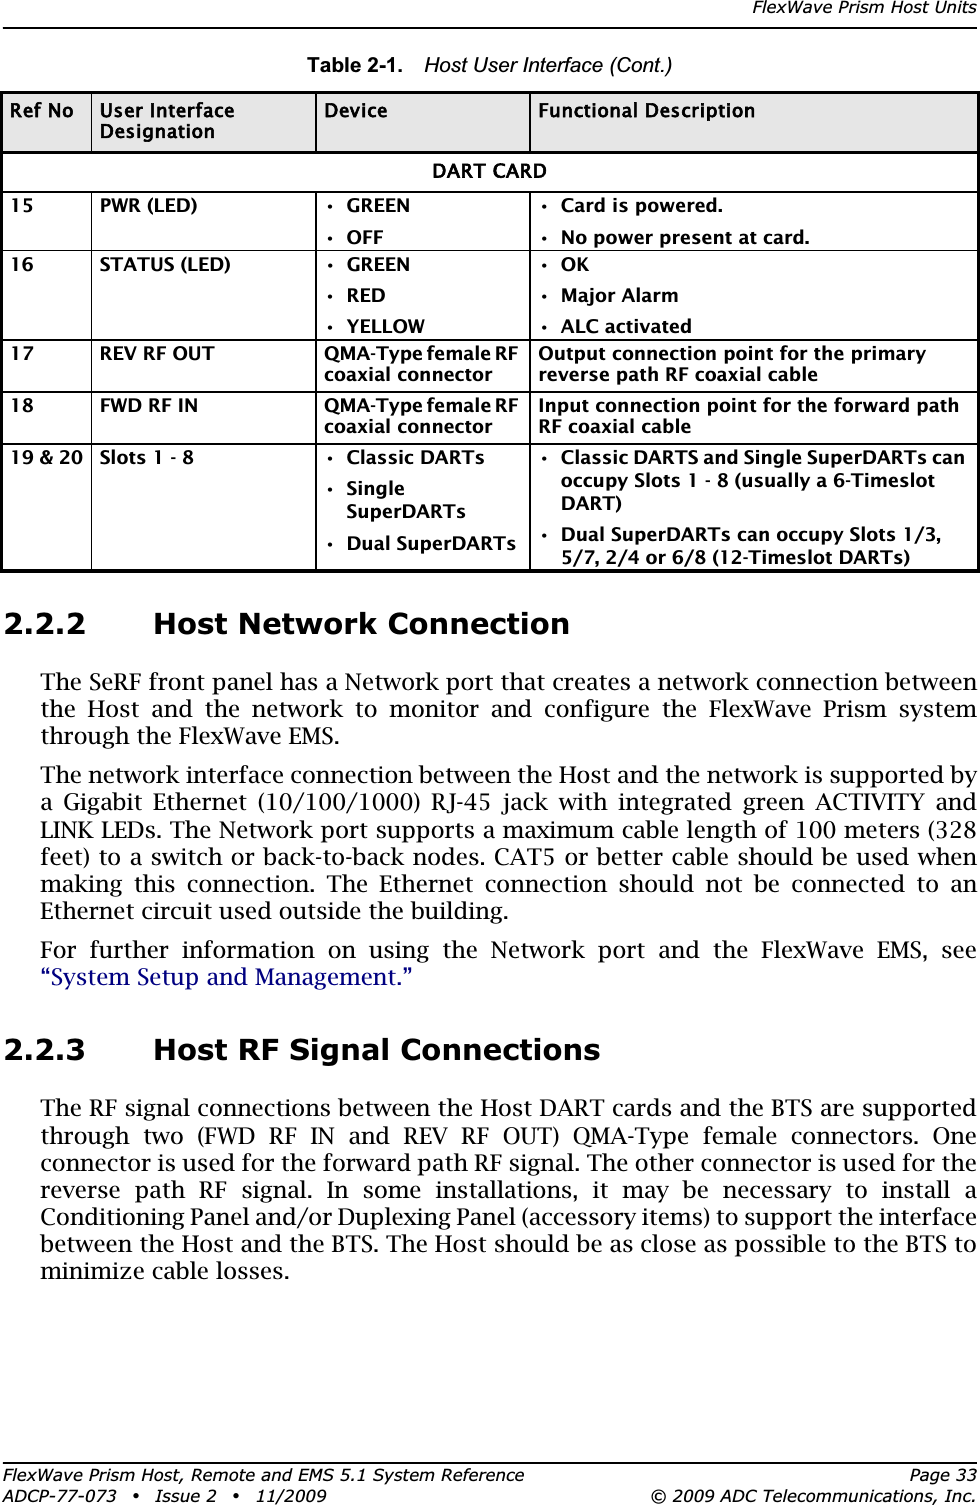 FlexWave Prism Host UnitsFlexWave Prism Host, Remote and EMS 5.1 System Reference Page 33ADCP-77-073 • Issue 2 • 11/2009 © 2009 ADC Telecommunications, Inc.2.2.2 Host Network ConnectionThe SeRF front panel has a Network port that creates a network connection between the Host and the network to monitor and configure the FlexWave Prism system through the FlexWave EMS.The network interface connection between the Host and the network is supported by a Gigabit Ethernet (10/100/1000) RJ-45 jack with integrated green ACTIVITY and LINK LEDs. The Network port supports a maximum cable length of 100 meters (328 feet) to a switch or back-to-back nodes. CAT5 or better cable should be used when making this connection. The Ethernet connection should not be connected to an Ethernet circuit used outside the building.For further information on using the Network port and the FlexWave EMS, see “System Setup and Management.”2.2.3 Host RF Signal ConnectionsThe RF signal connections between the Host DART cards and the BTS are supported through two (FWD RF IN and REV RF OUT) QMA-Type female connectors. One connector is used for the forward path RF signal. The other connector is used for the reverse path RF signal. In some installations, it may be necessary to install a Conditioning Panel and/or Duplexing Panel (accessory items) to support the interface between the Host and the BTS. The Host should be as close as possible to the BTS to minimize cable losses.DART CARD15 PWR (LED) • GREEN•OFF• Card is powered.• No power present at card.16 STATUS (LED) • GREEN•RED• YELLOW•OK• Major Alarm• ALC activated17 REV RF OUT QMA-Type female RF coaxial connectorOutput connection point for the primary reverse path RF coaxial cable18 FWD RF IN QMA-Type female RF coaxial connectorInput connection point for the forward path RF coaxial cable19 &amp; 20 Slots 1 - 8 • Classic DARTs•Single SuperDARTs• Dual SuperDARTs• Classic DARTS and Single SuperDARTs can occupy Slots 1 - 8 (usually a 6-Timeslot DART)• Dual SuperDARTs can occupy Slots 1/3, 5/7, 2/4 or 6/8 (12-Timeslot DARTs)Table 2-1.  Host User Interface (Cont.)Ref No User Interface DesignationDevice Functional Description